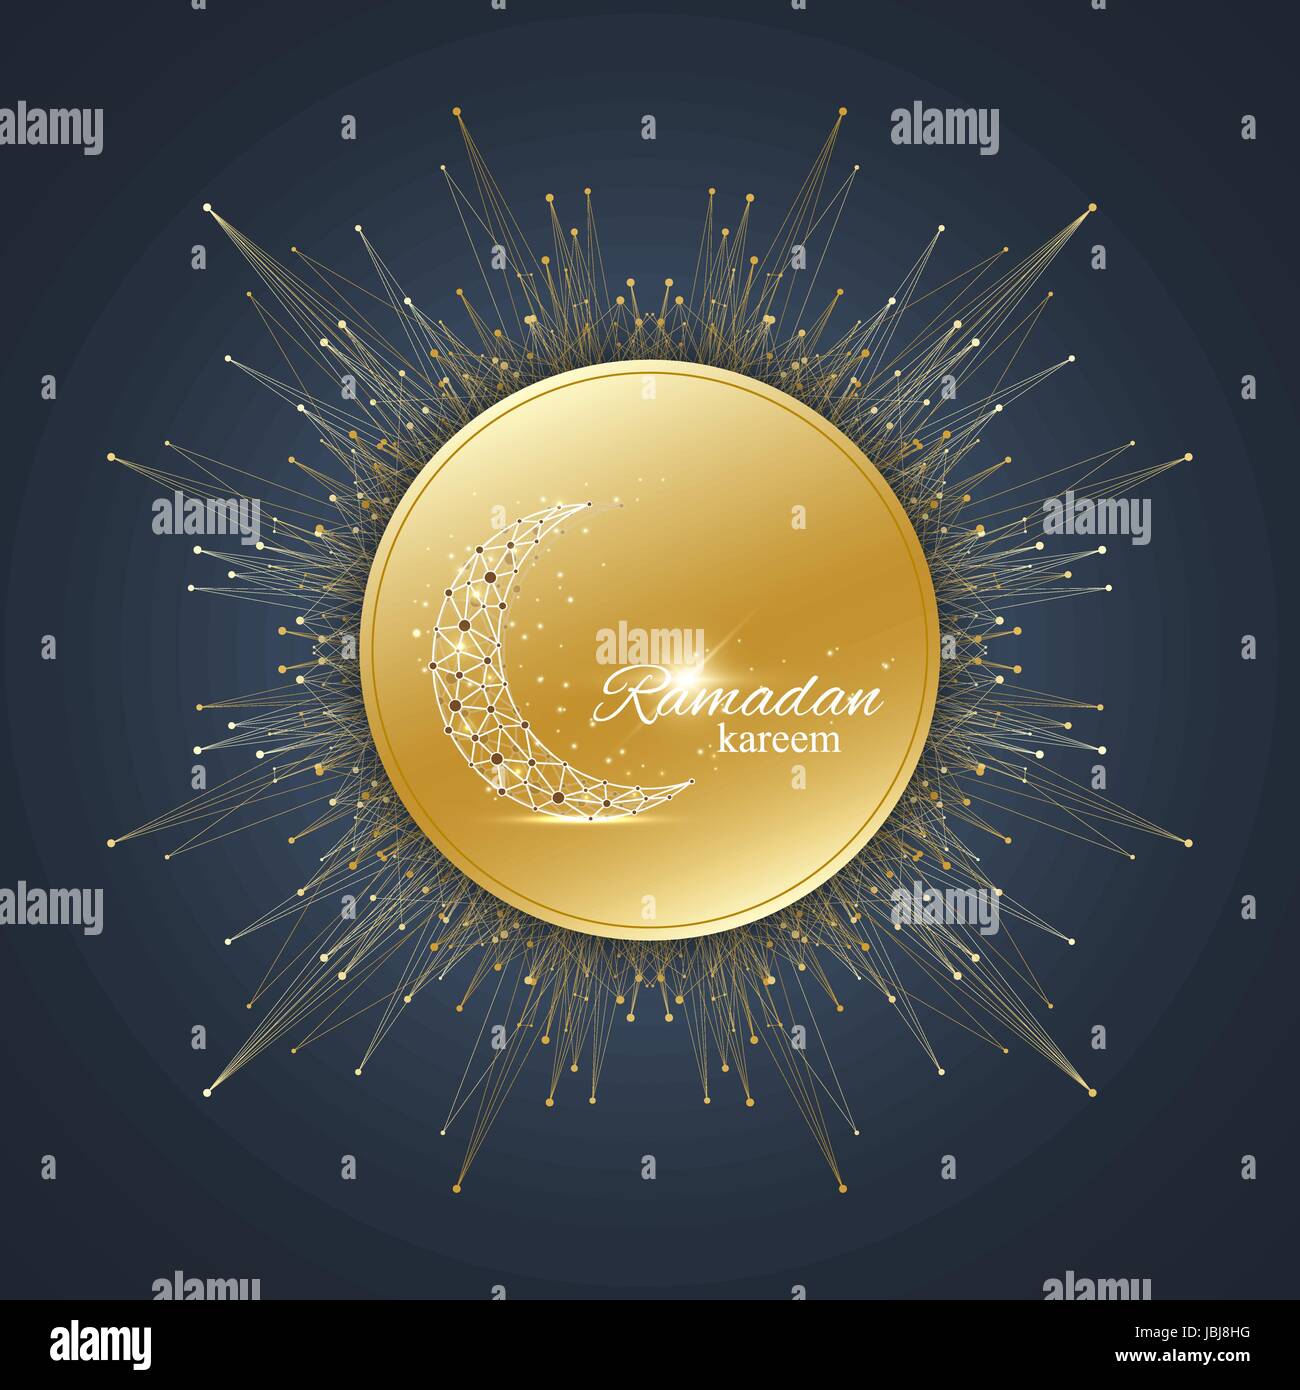 Ramadan Kareem text greetings background. Golden moon made from connected line and dots.Black background with golden mandala decoration. Eid Mubarak celebration. Vector illustration. Stock Vector